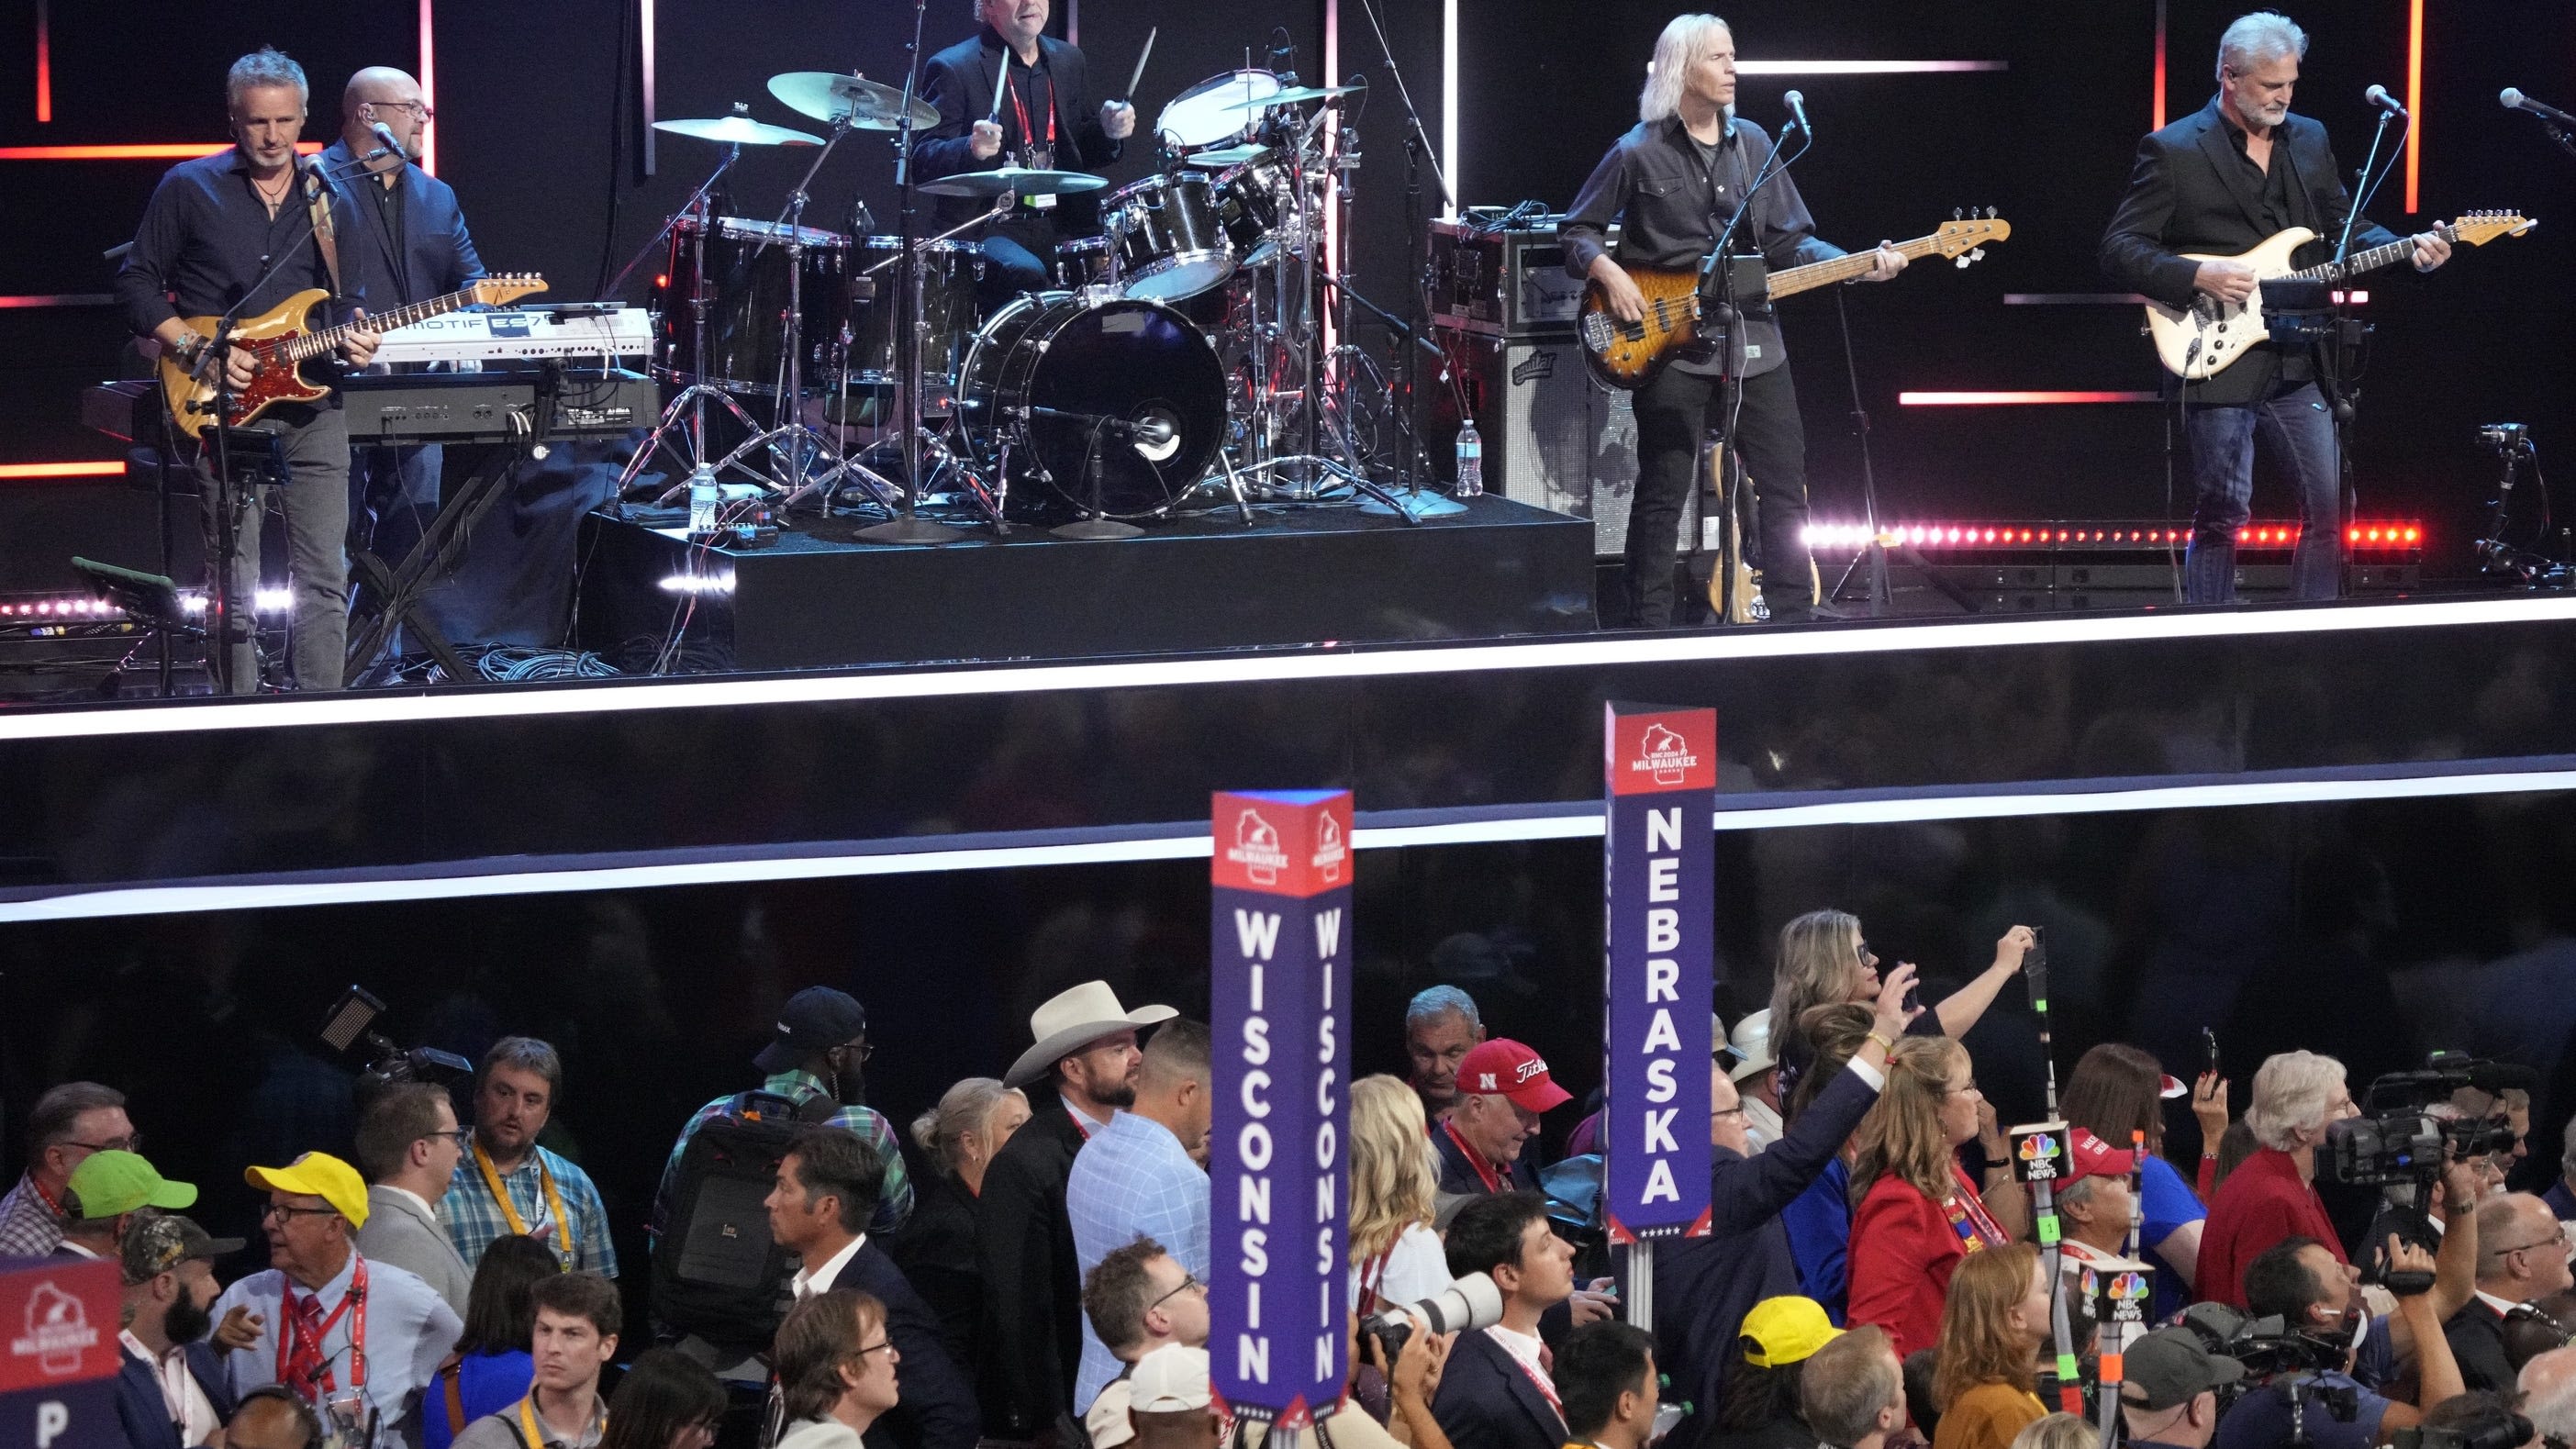 Country band Sixwire plays at RNC after abrupt teleprompter malfunction